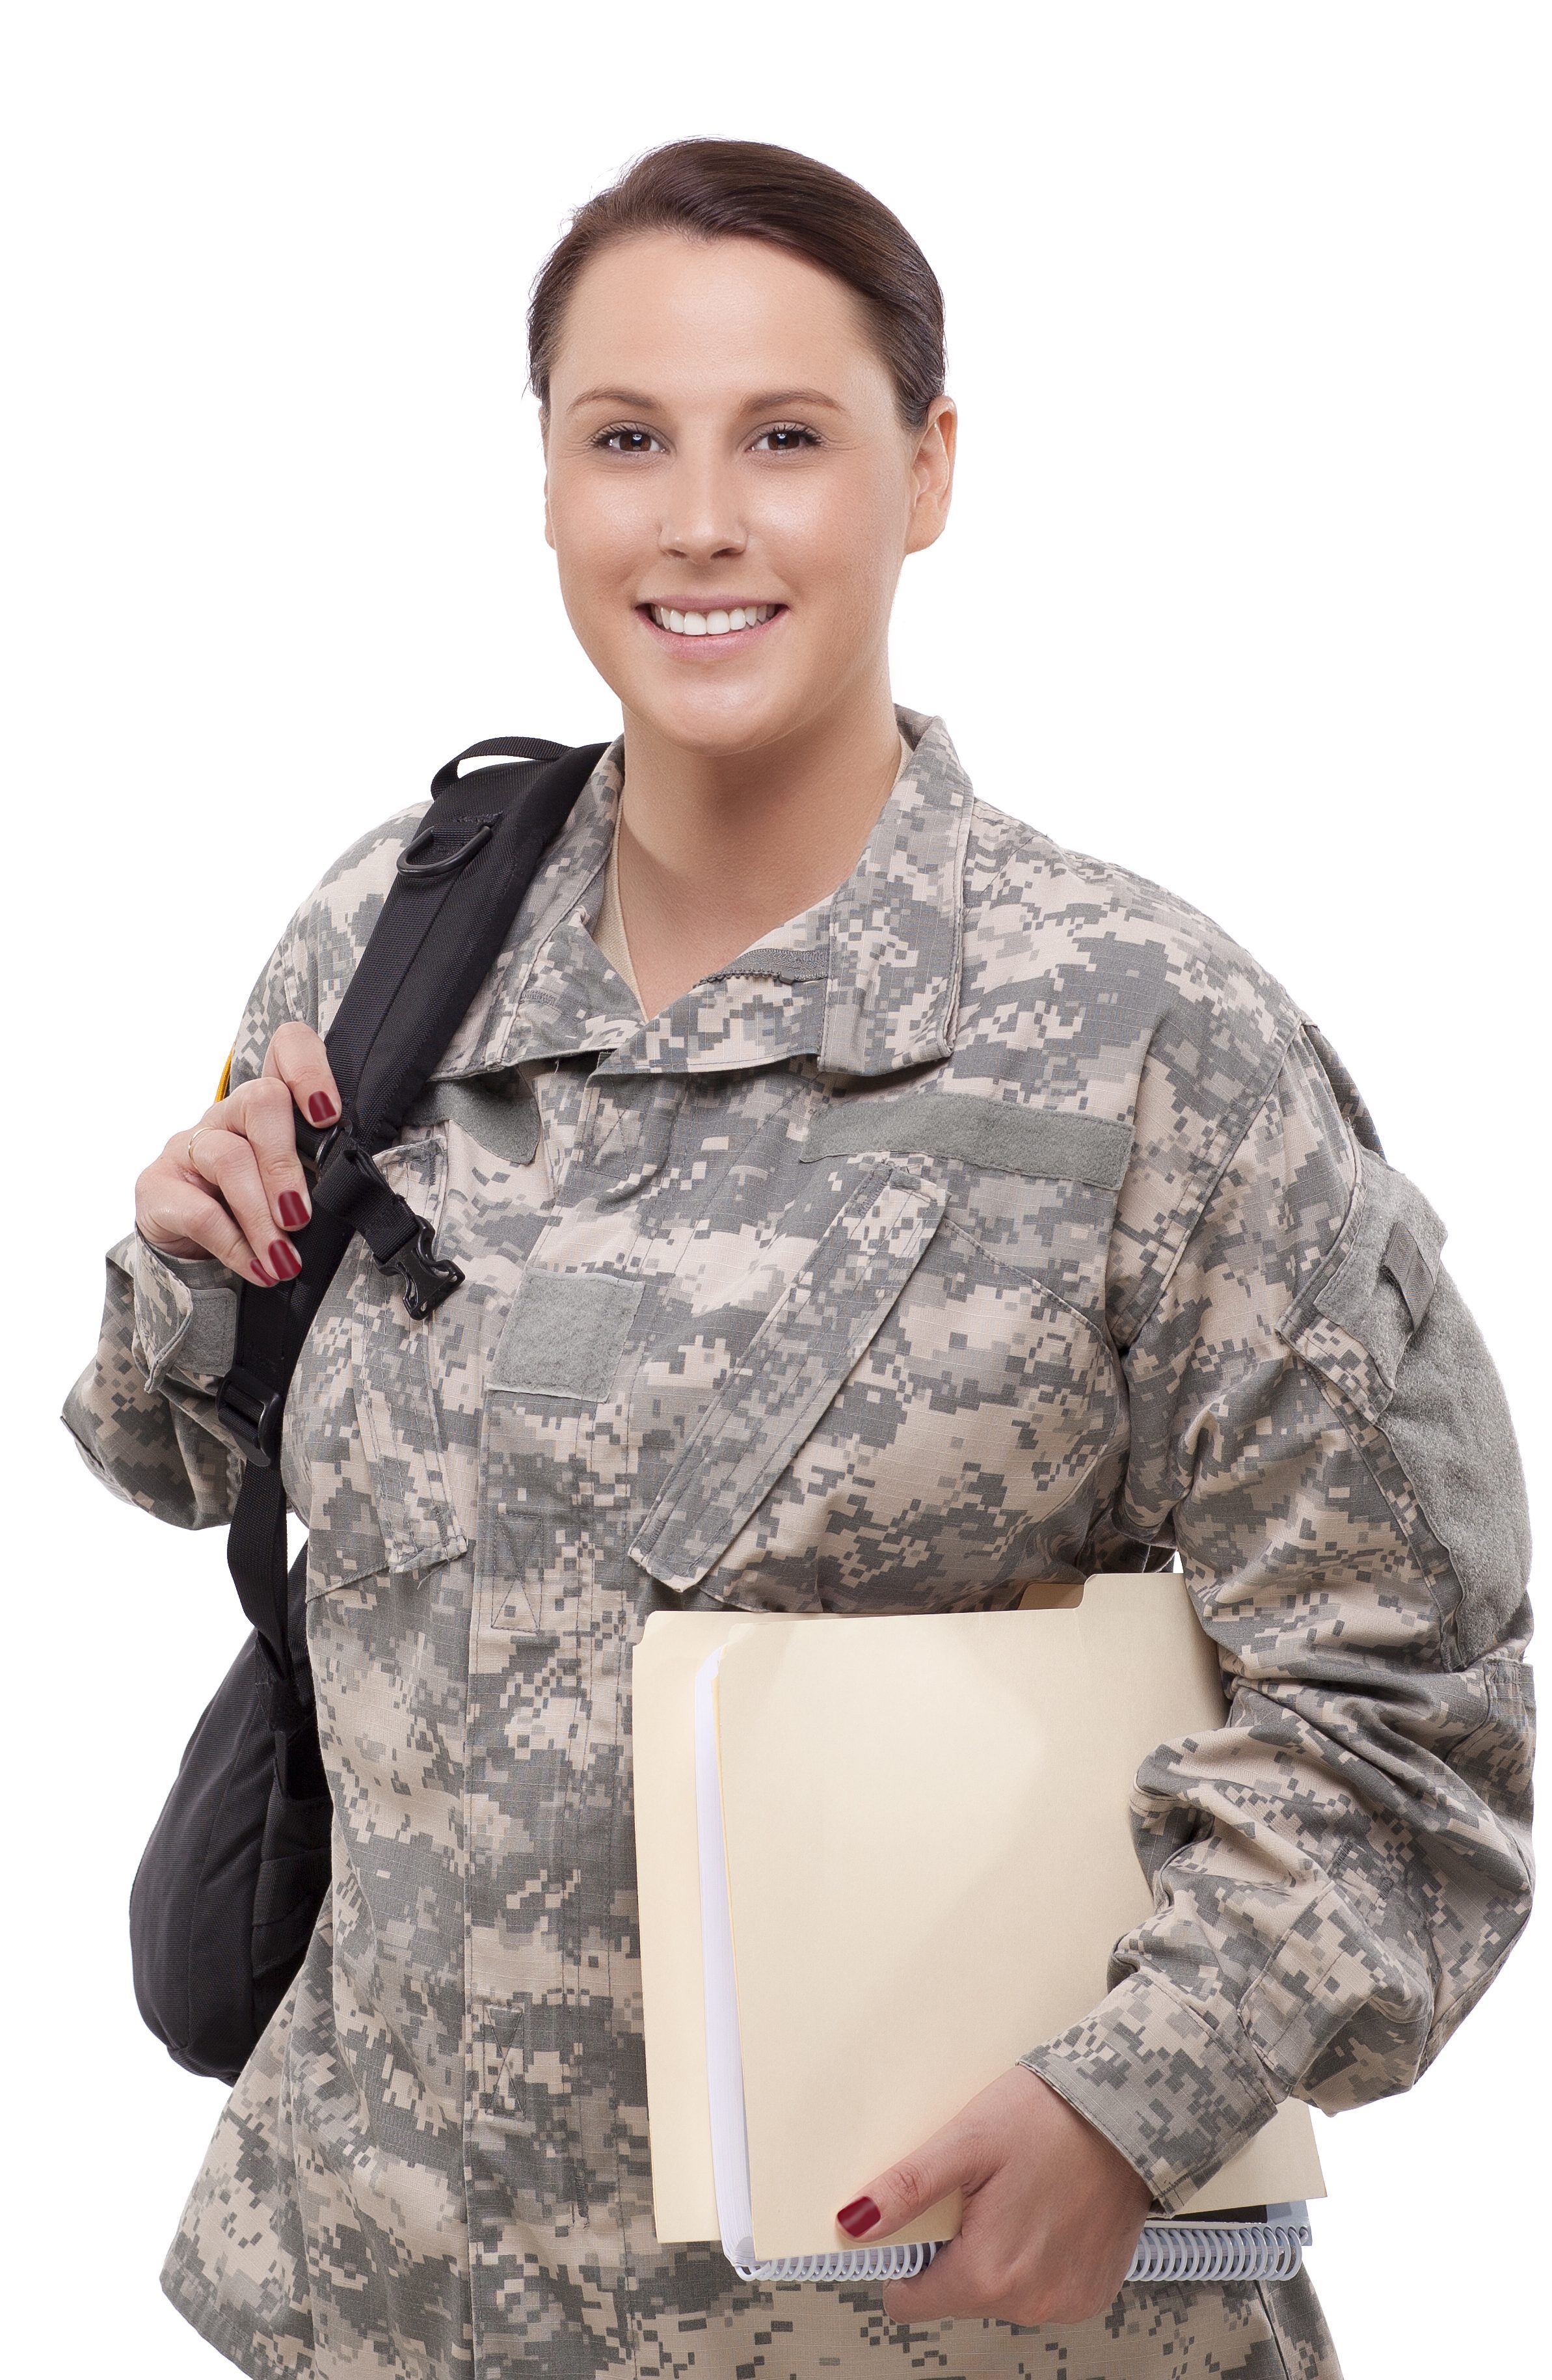 Caucasian female solder in gray fatigues wearing a backpack and holding a manila folder.